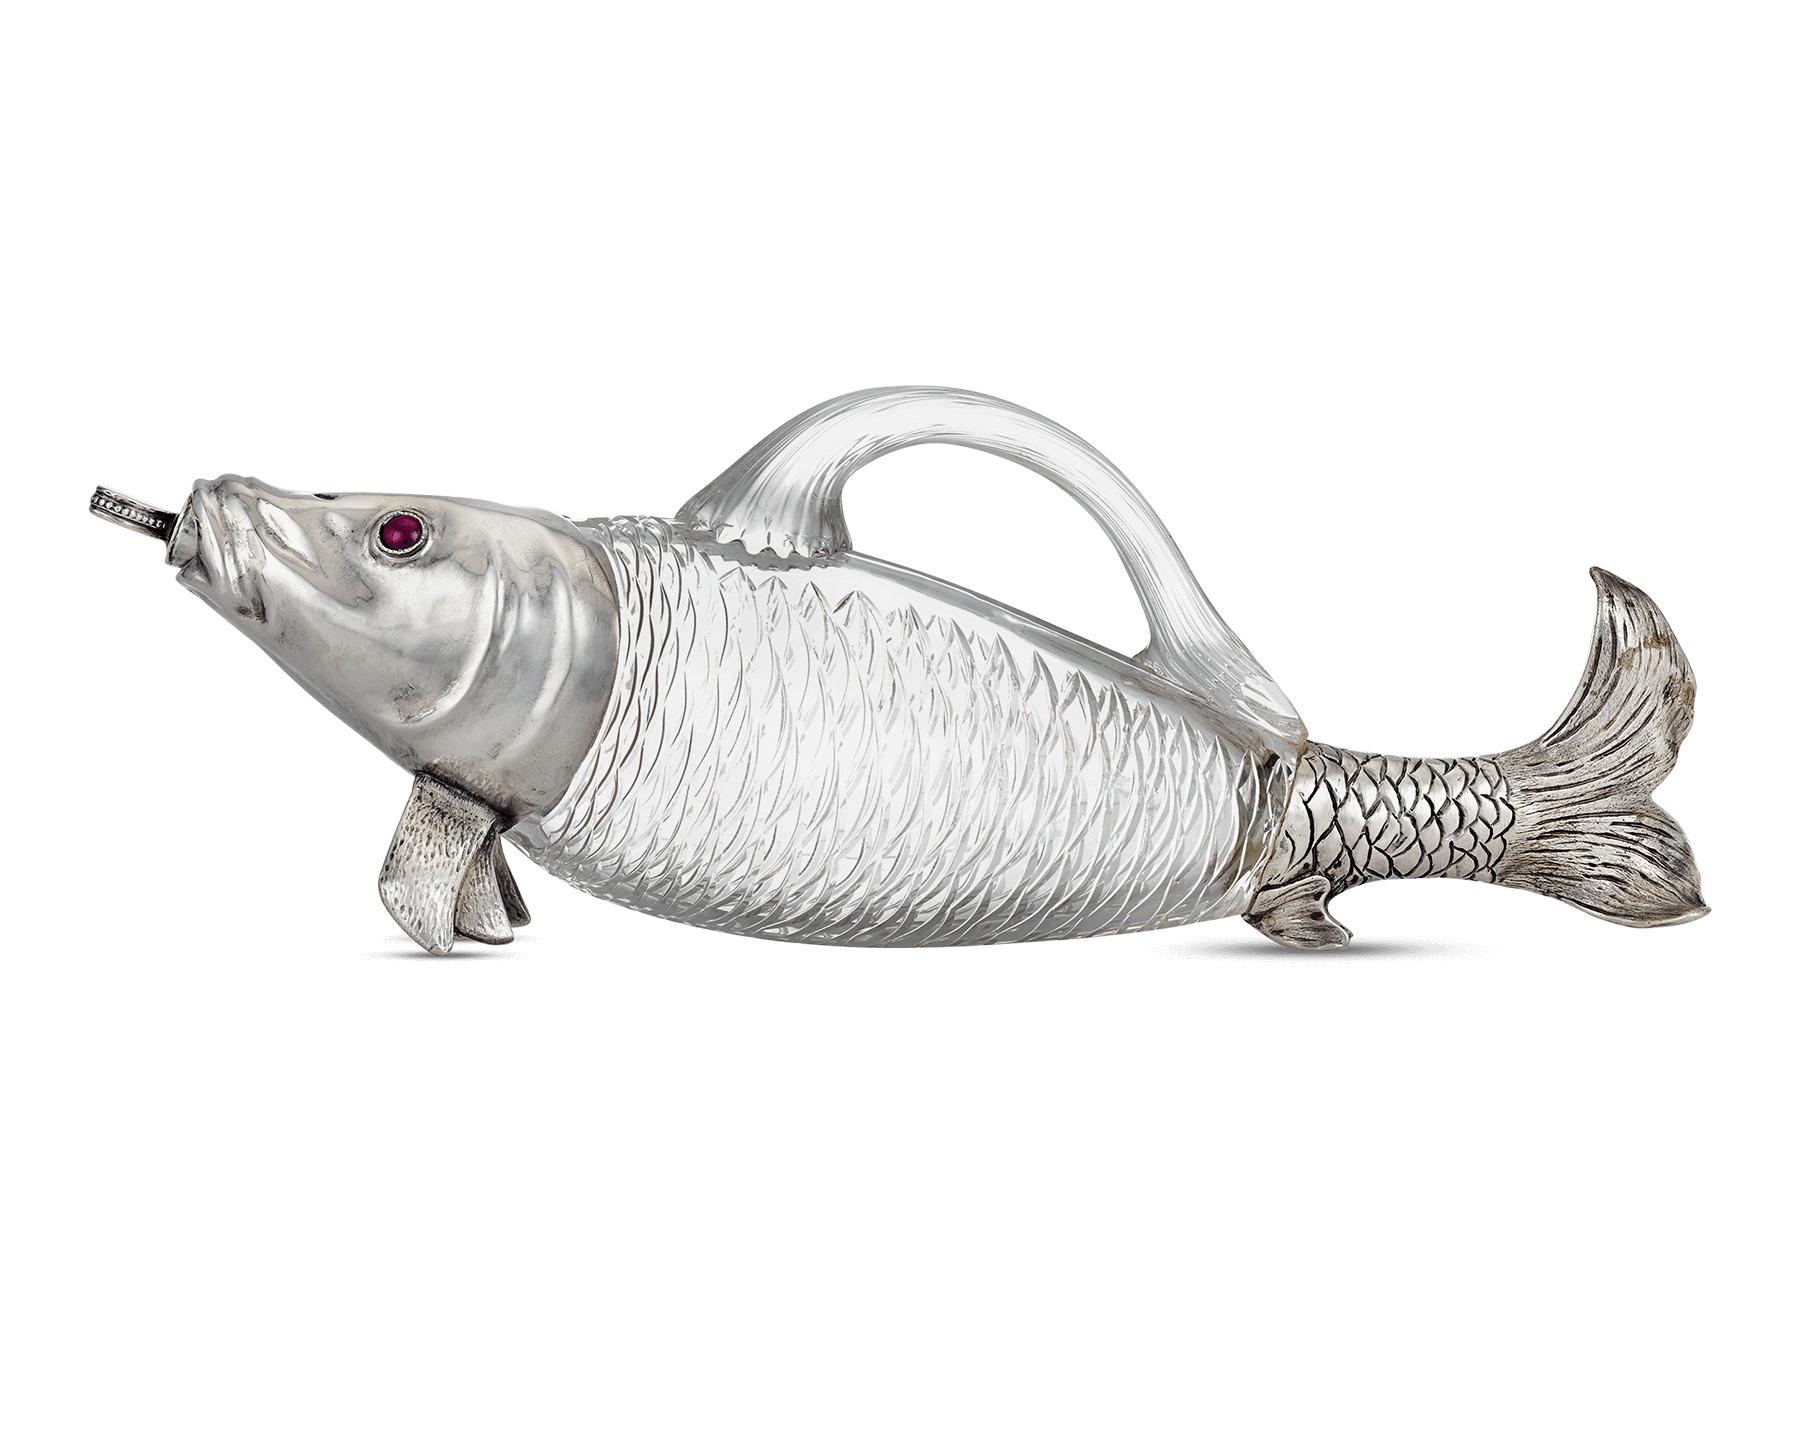 This rare and remarkable claret liquor jug was designed to take the shape of a whimsical fish. Comprised of crystal, the aquatic creature’s body serves as a handled vessel. Its head and tail are crafted of fine silver, including the jug’s spout, the